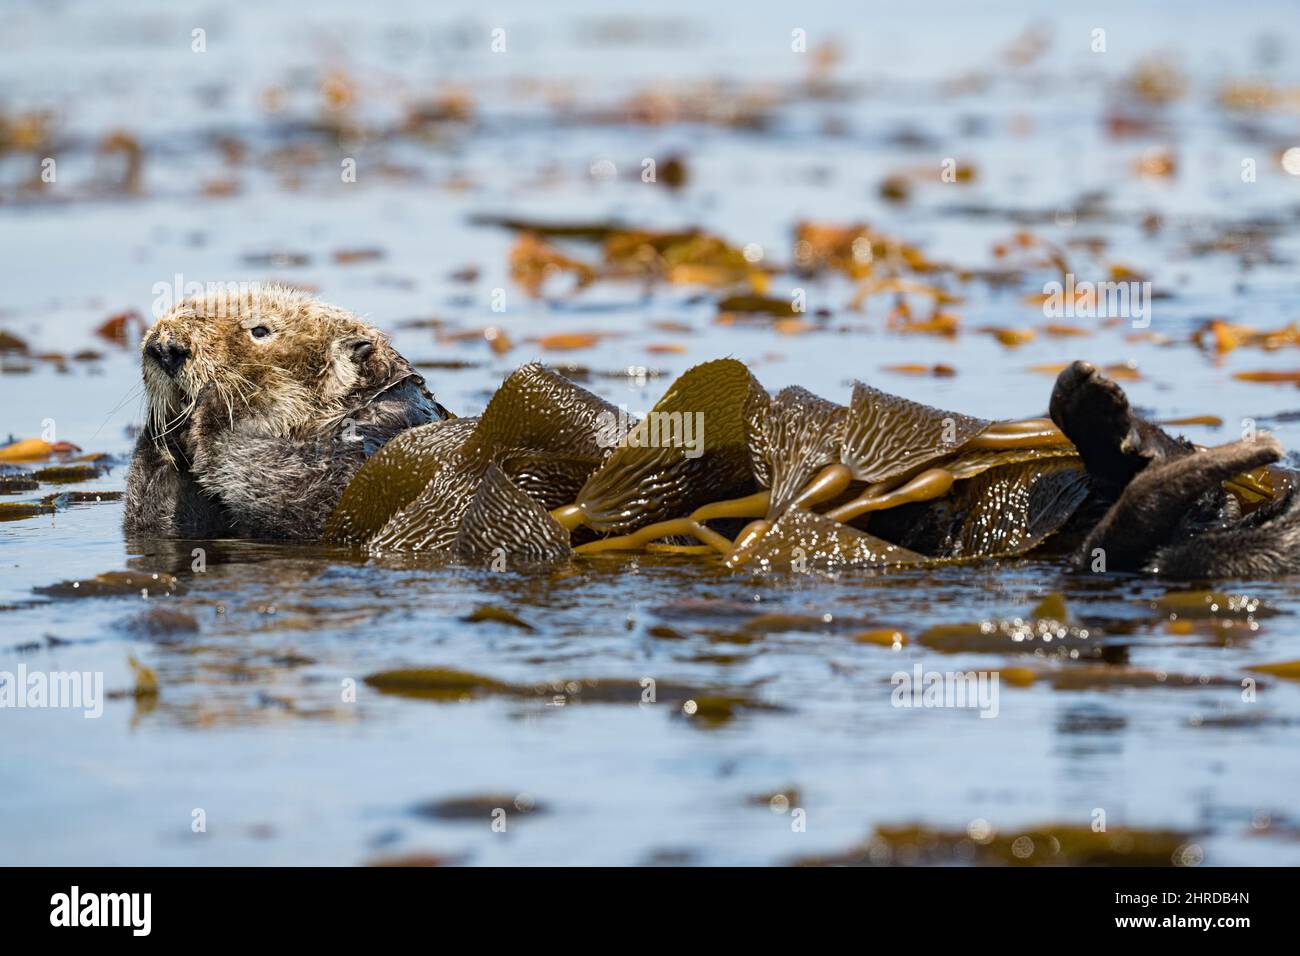 California sea otter, Enhyrdra lutris nereis ( threatened species ), wrapped in kelp to hold itself in place while resting, Monterey Bay, California Stock Photo